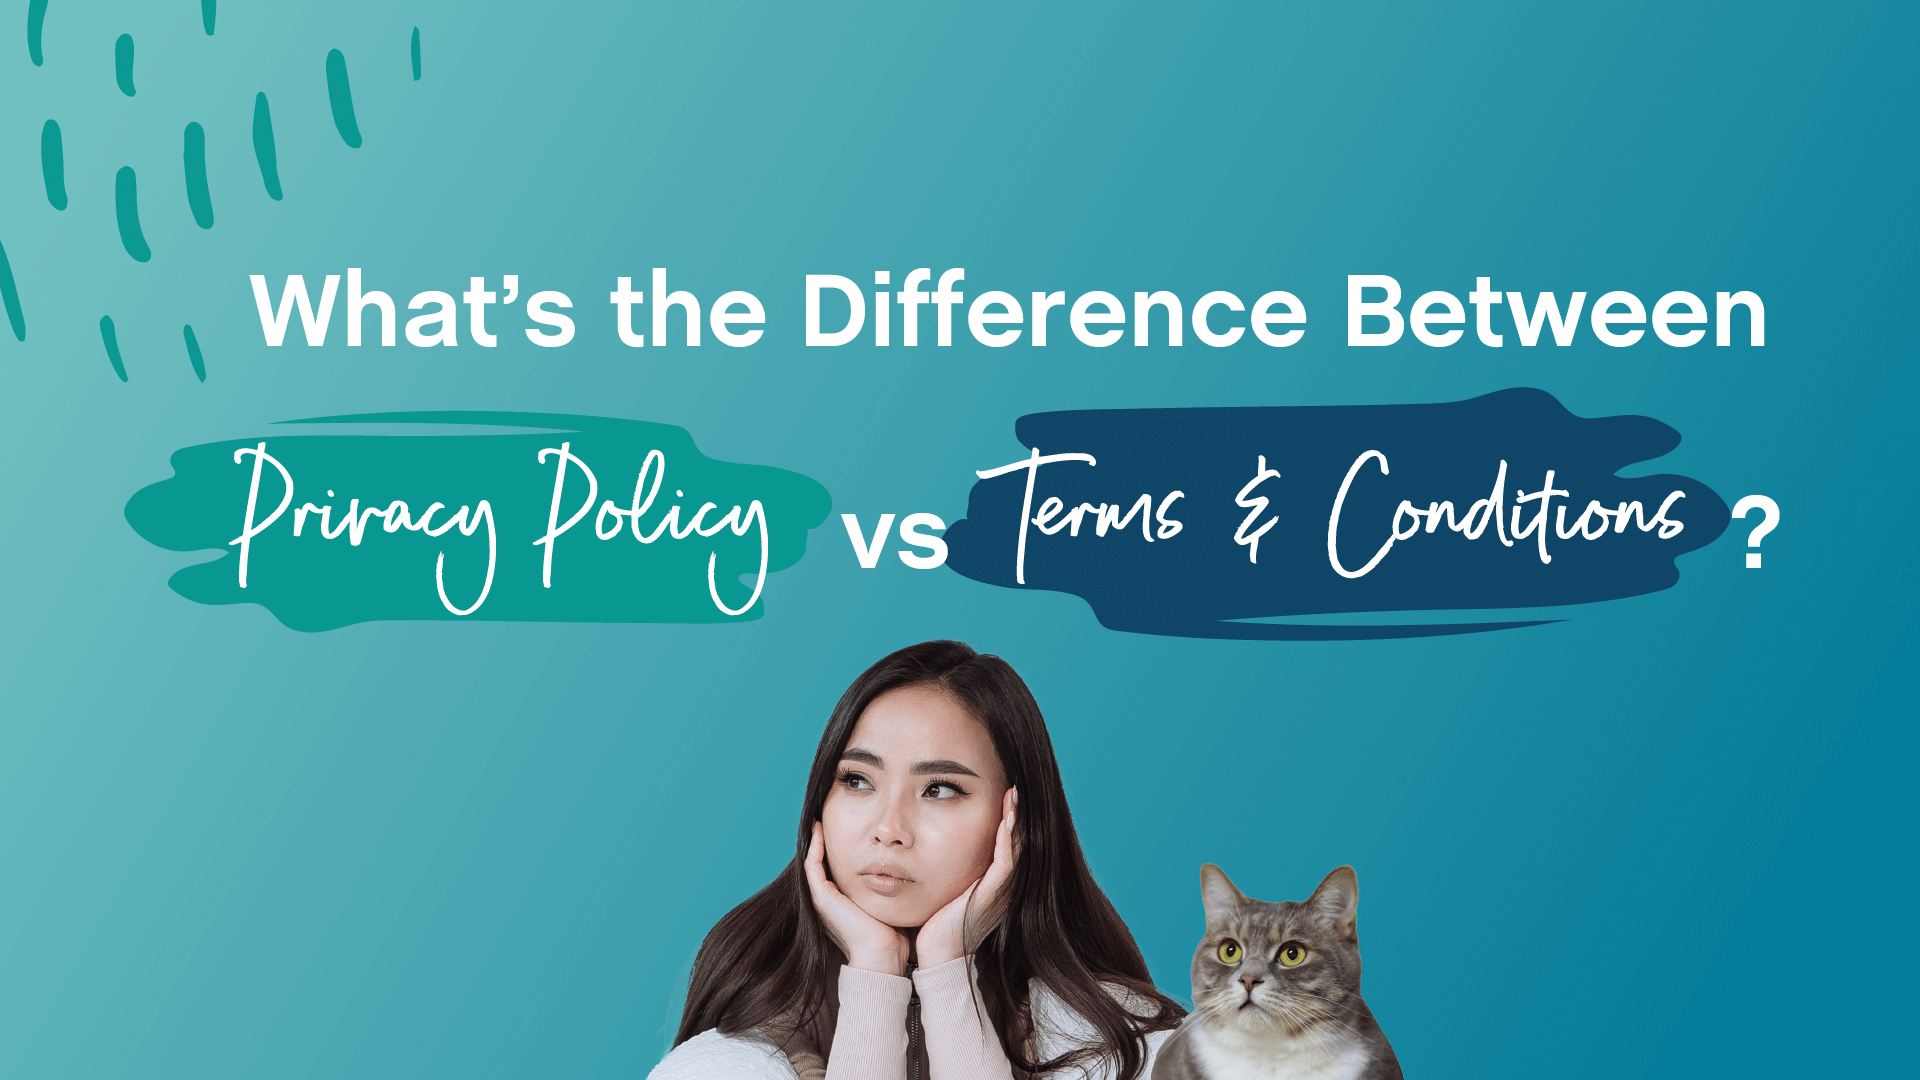 What's the Difference Between Terms and Condition and Privacy Policy?